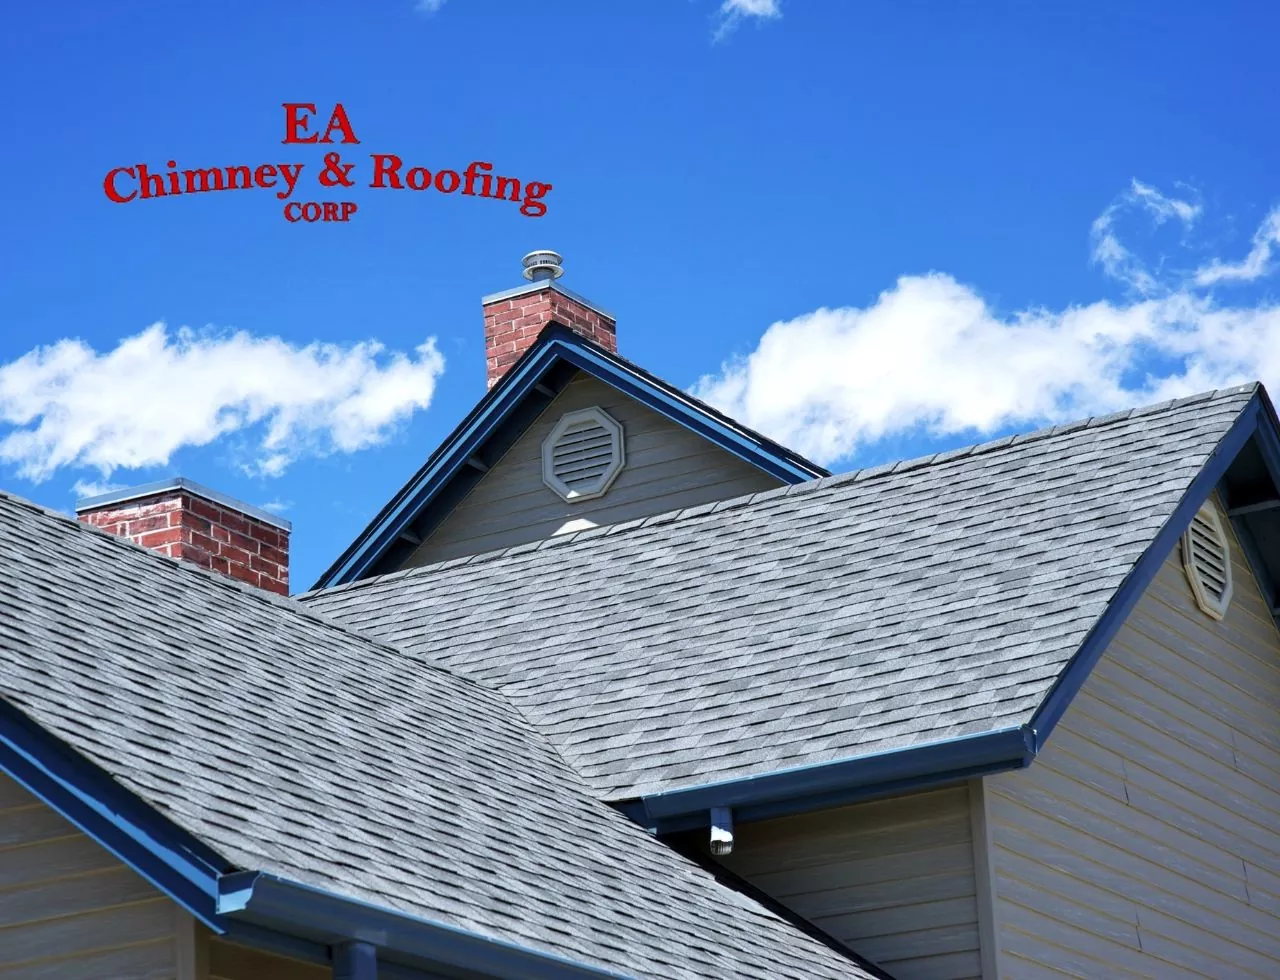 Learn all the benefits of a new roof